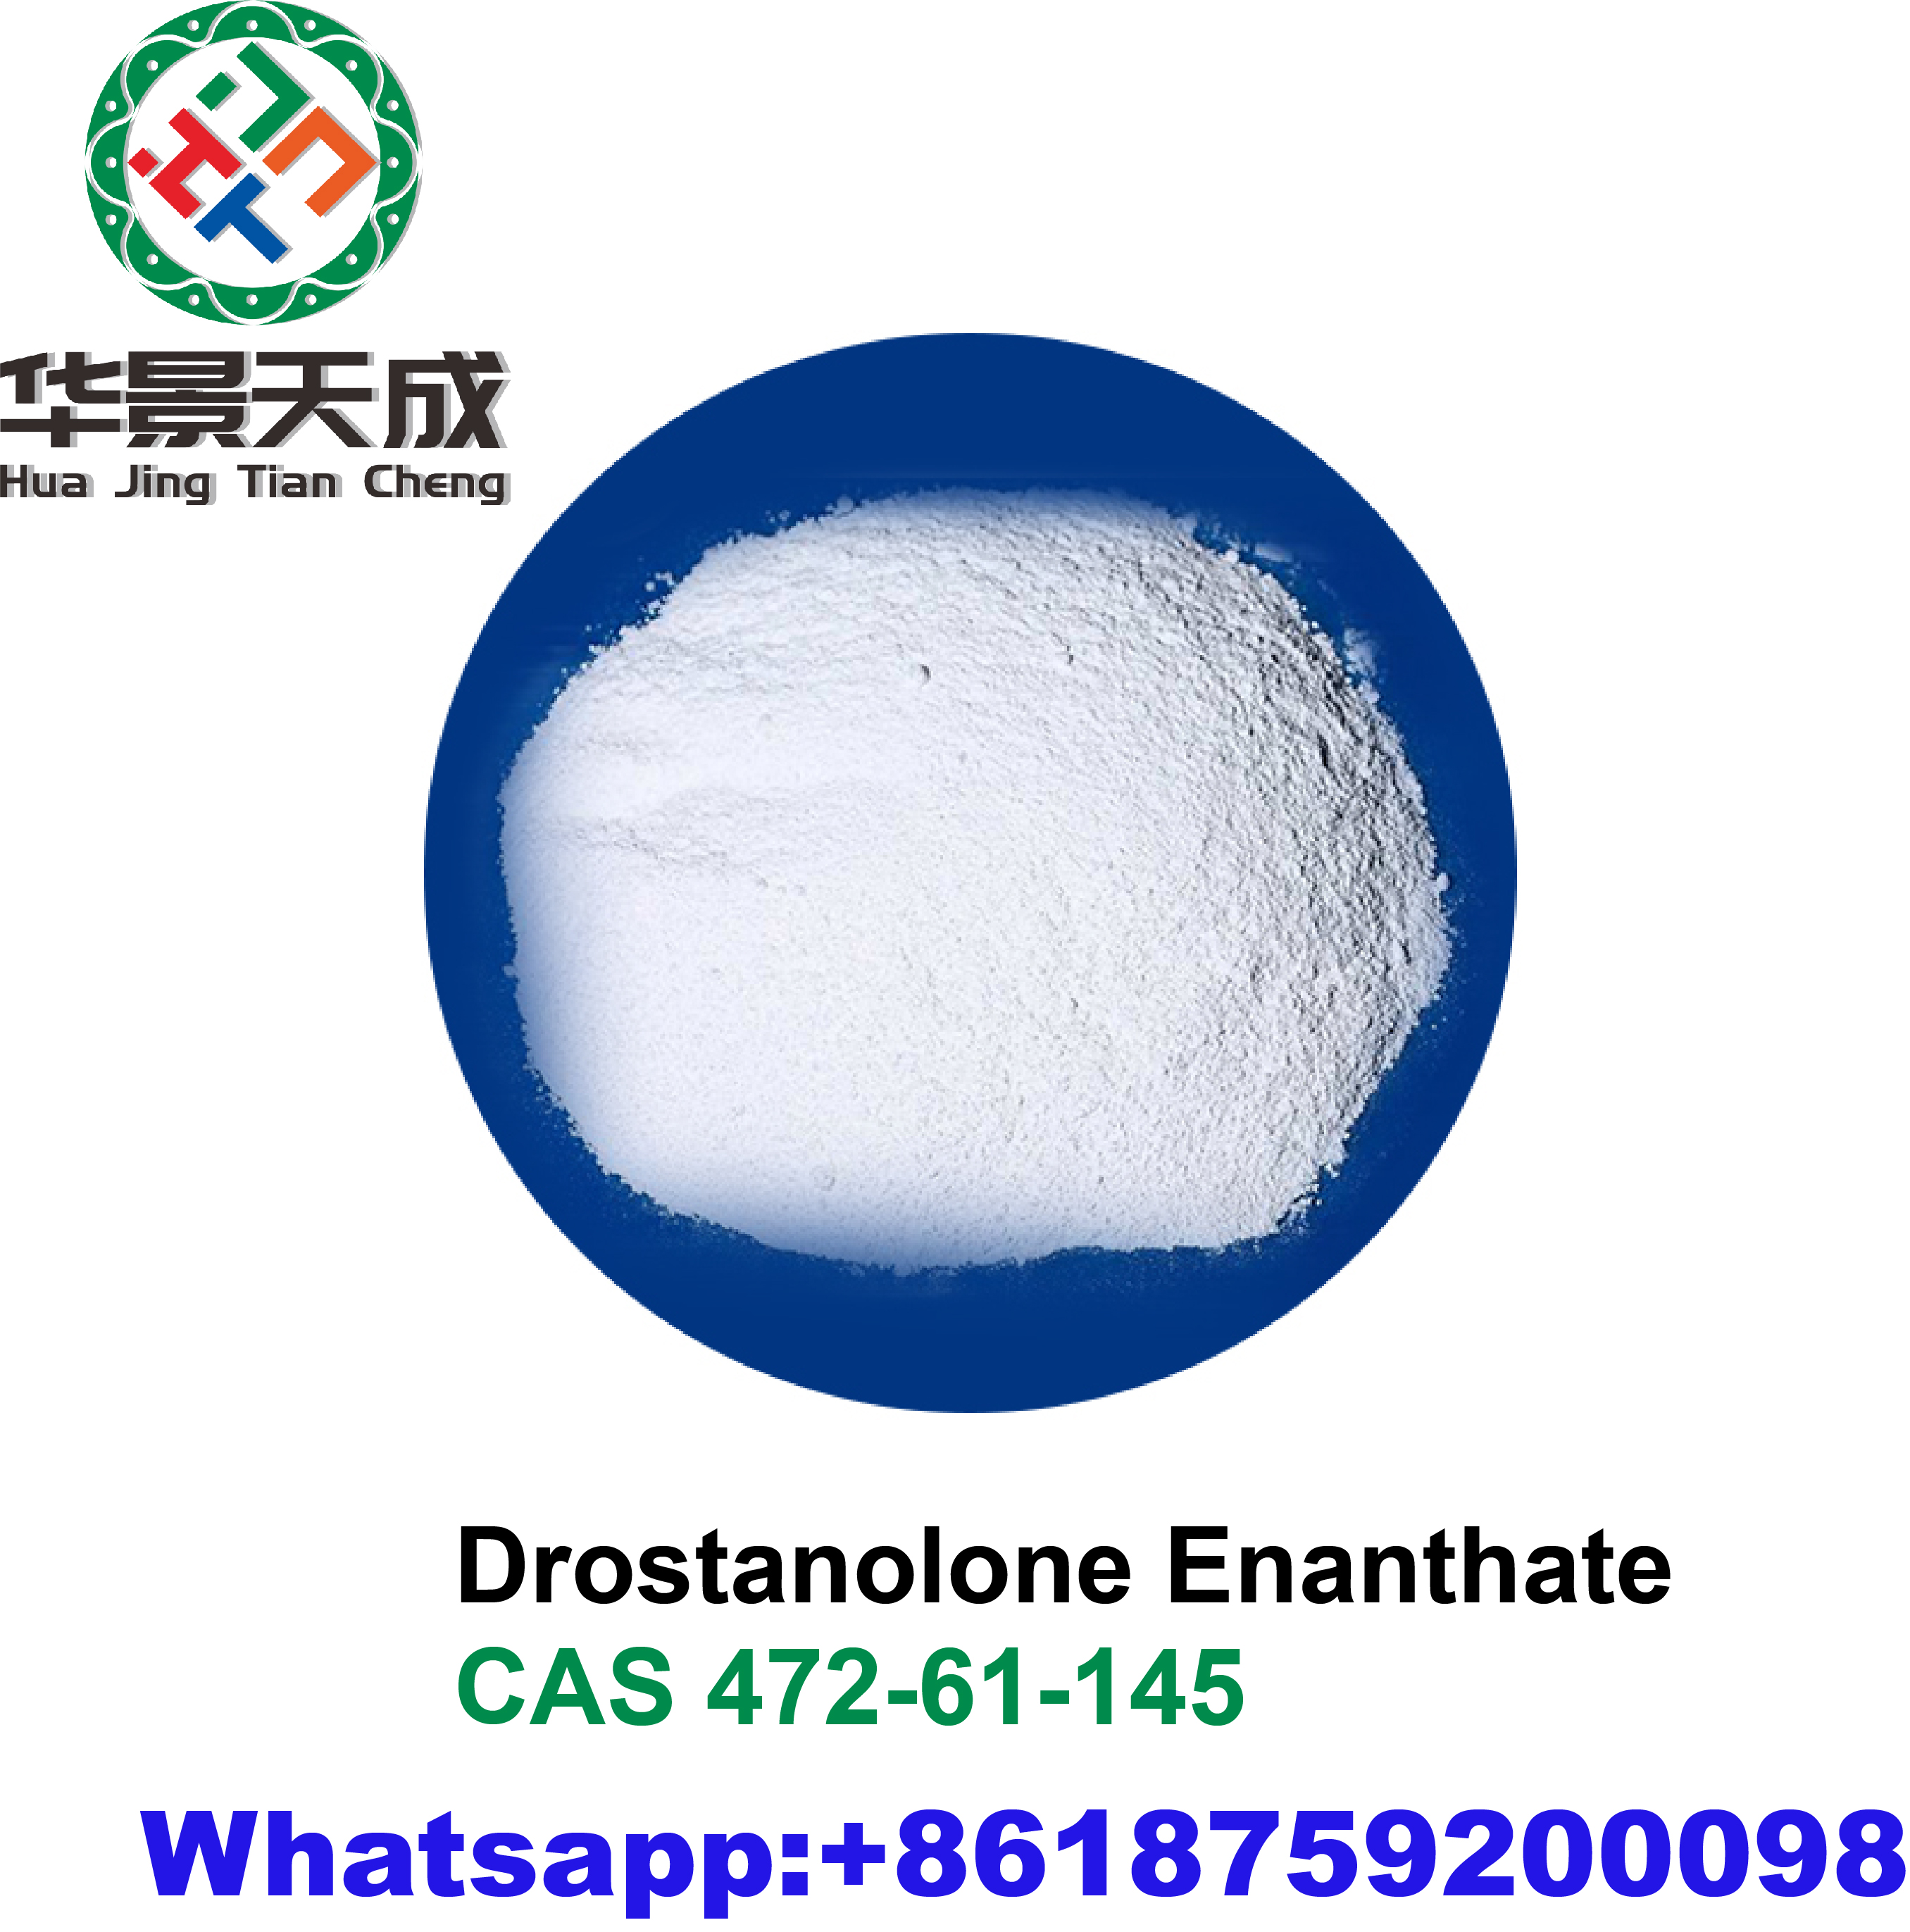 Anabolics Masteron E Raw Steroids Powder Drostanolone Enanthate with Safe Deliver Paypal Accep CasNO.472-61-145 Featured Image